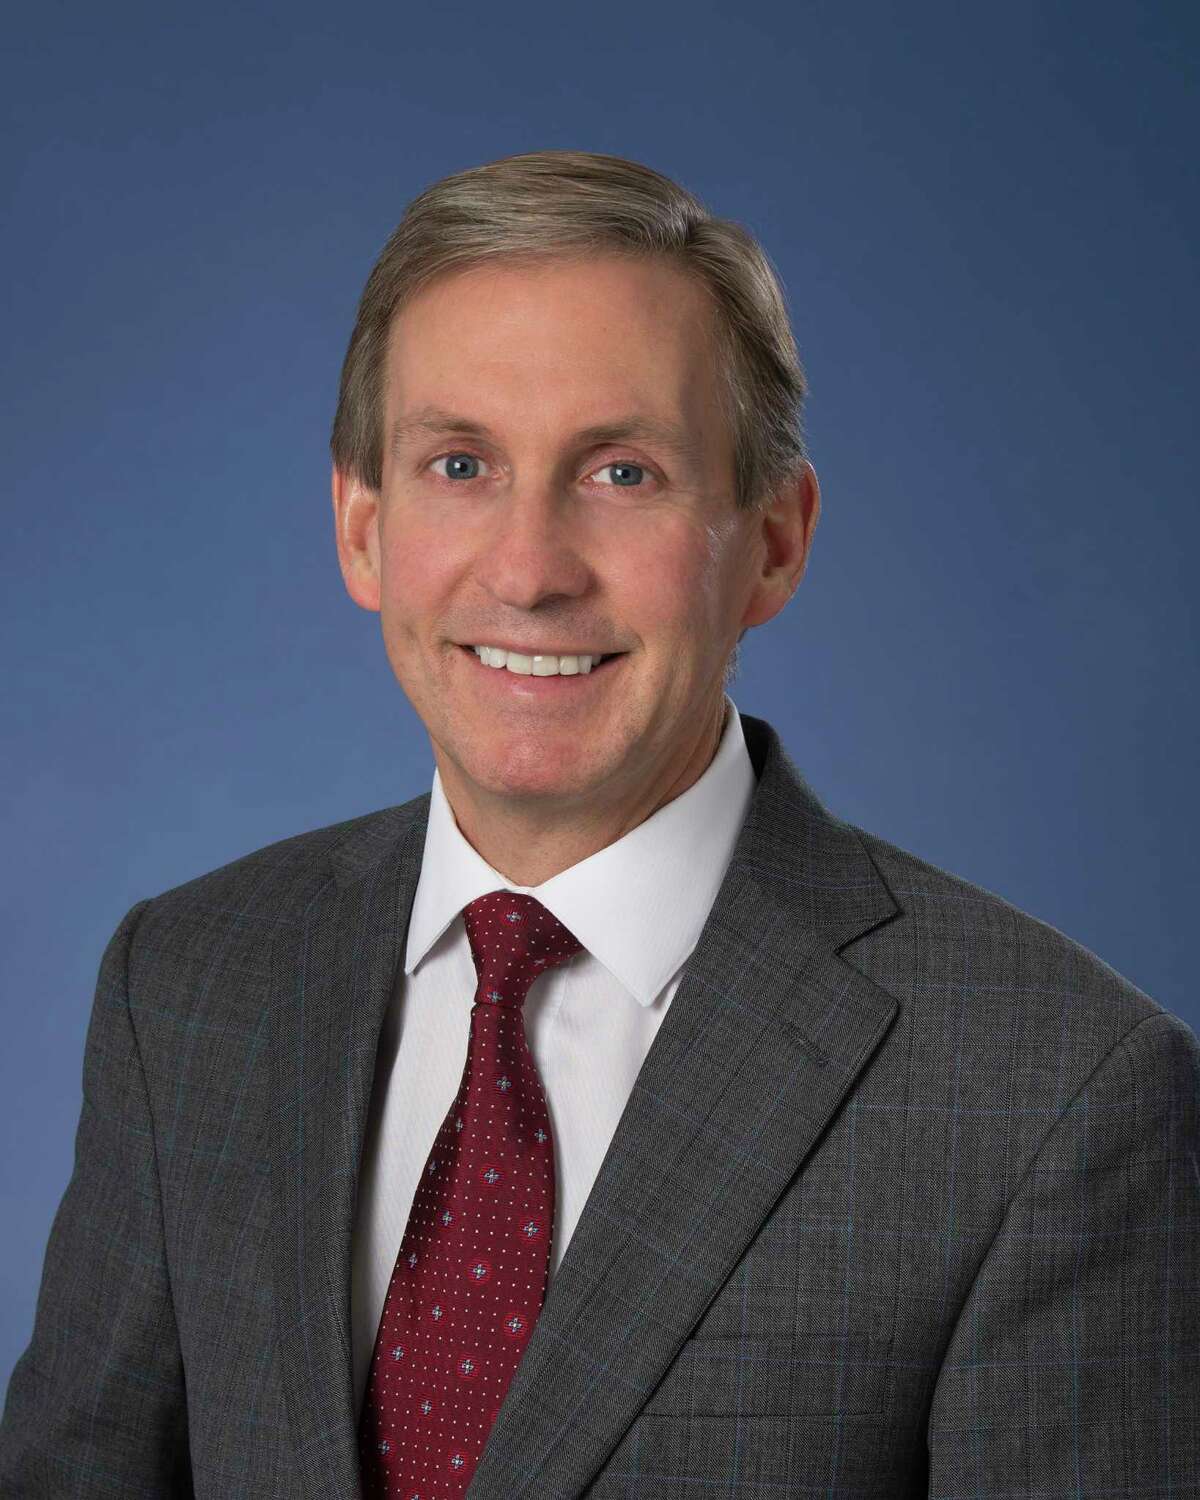 Peter Pisters, named the sole finalist for the job of president of MD Anderson, is currently president and CEO of University Health Network in Toronto.